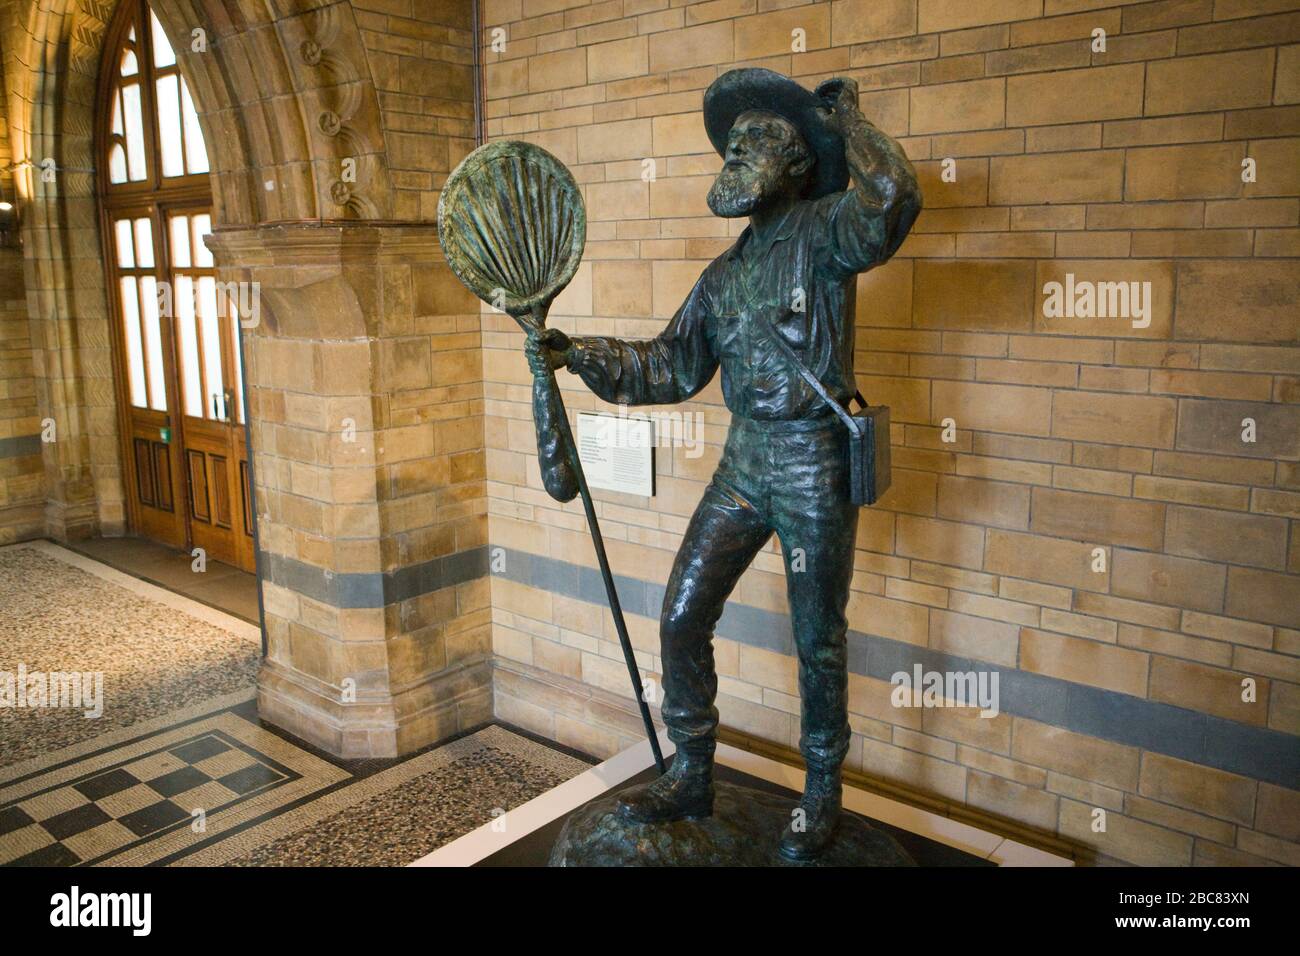 Statue of Alfred Russel Wallace (co discoverer of natural selection) in Natural History Museum, London, UK. Stock Photo